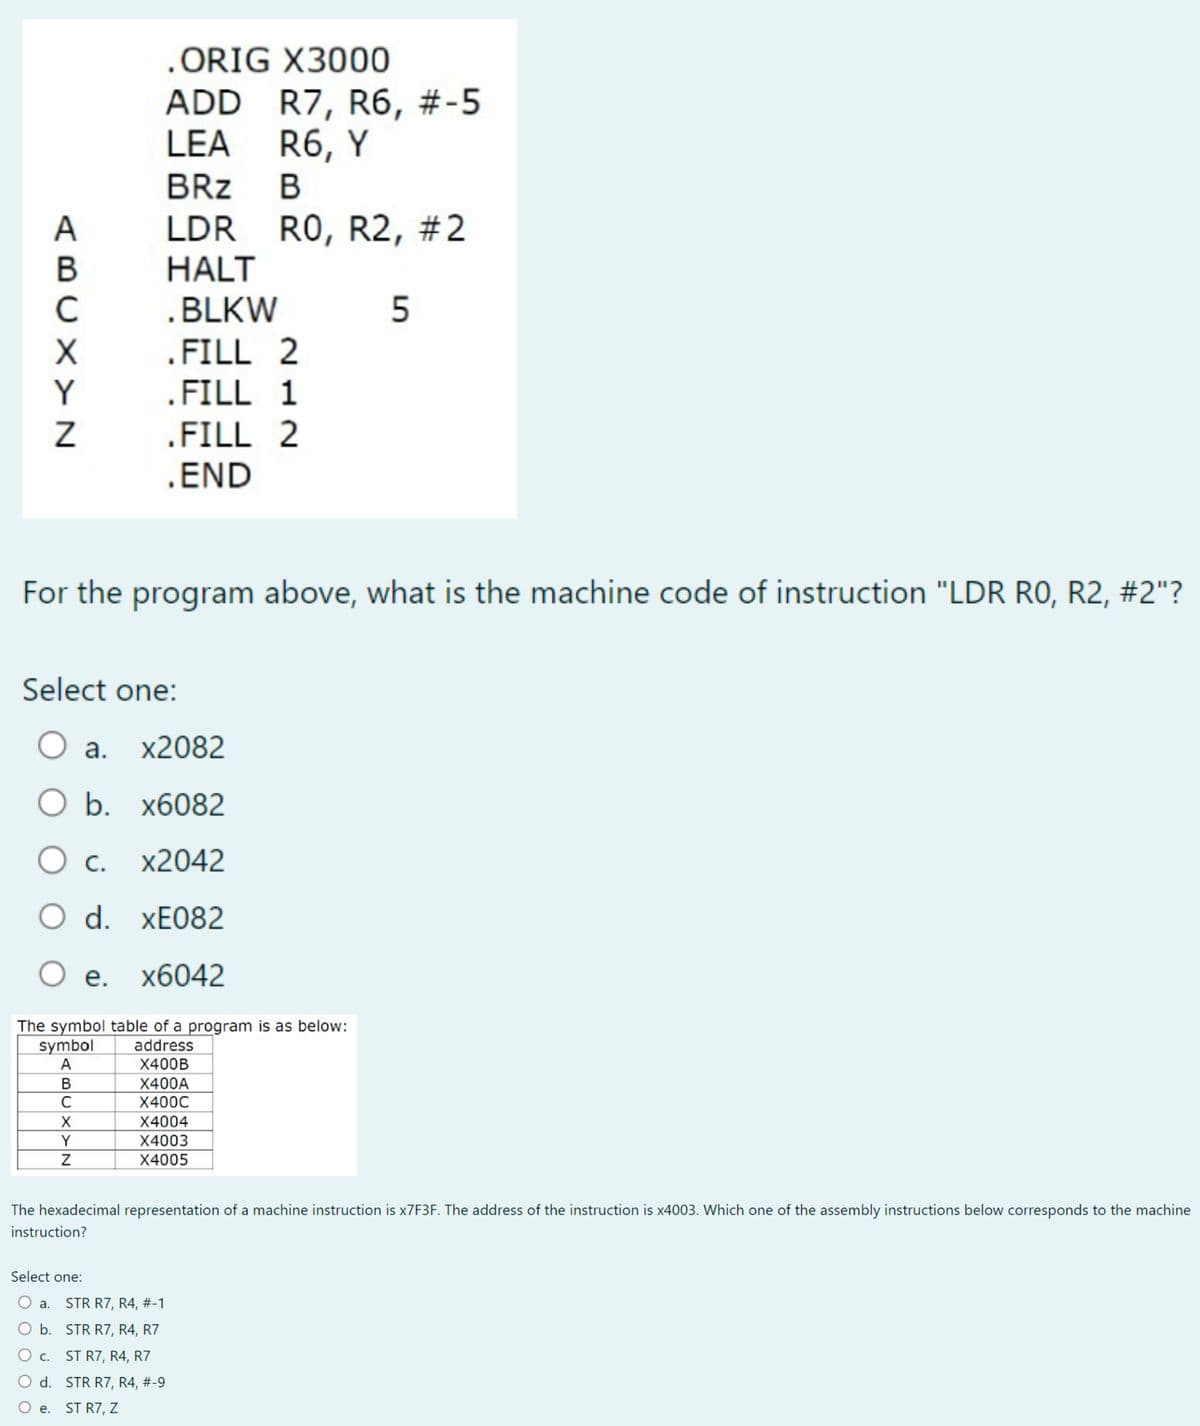 A
B
с
X
Y
- N
Select one:
.ORIG X3000
ADD R7, R6, #-5
LEA R6, Y
BRZ B
LDR
HALT
.BLKW
For the program above, what is the machine code of instruction "LDR RO, R2, #2"?
a. x2082
O b. x6082
O c. x2042
O d. xE082
O e. x6042
symbol
A
B
C
X
Y
Z
The symbol table of a program is as below:
address
X400B
X400A
X400C
X4004
X4003
X4005
Select one:
a.
O b.
O c.
.FILL 2
.FILL 1
.FILL 2
.END
RO, R2, #2
The hexadecimal representation of a machine instruction is x7F3F. The address of the instruction is x4003. Which one of the assembly instructions below corresponds to the machine
instruction?
STR R7, R4, #-1
STR R7, R4, R7
ST R7, R4, R7
STR R7, R4, #-9
d.
e. ST R7, Z
5